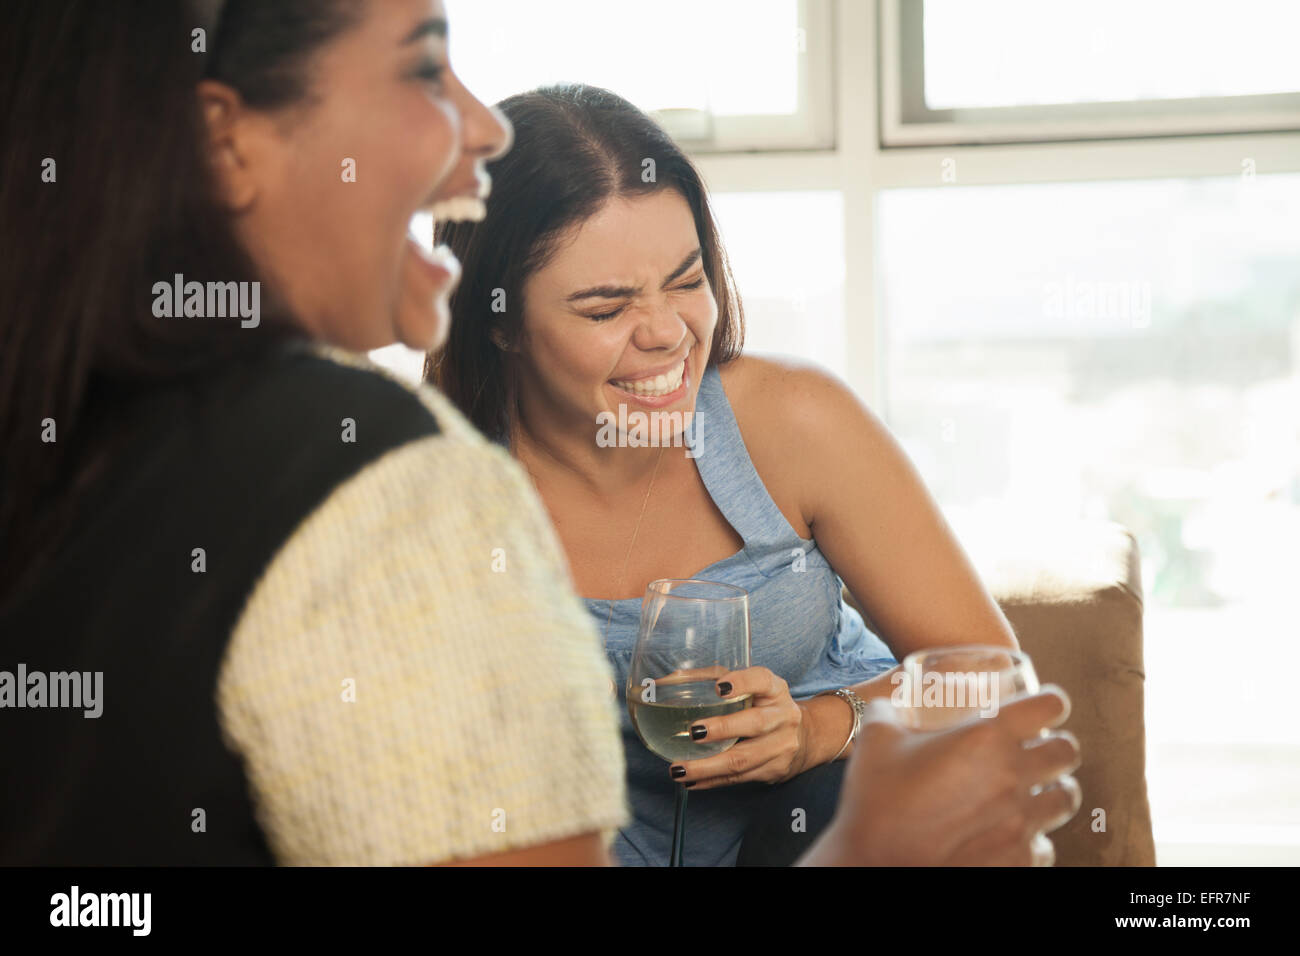 Two female friends sitting on sofa, drinking wine Stock Photo